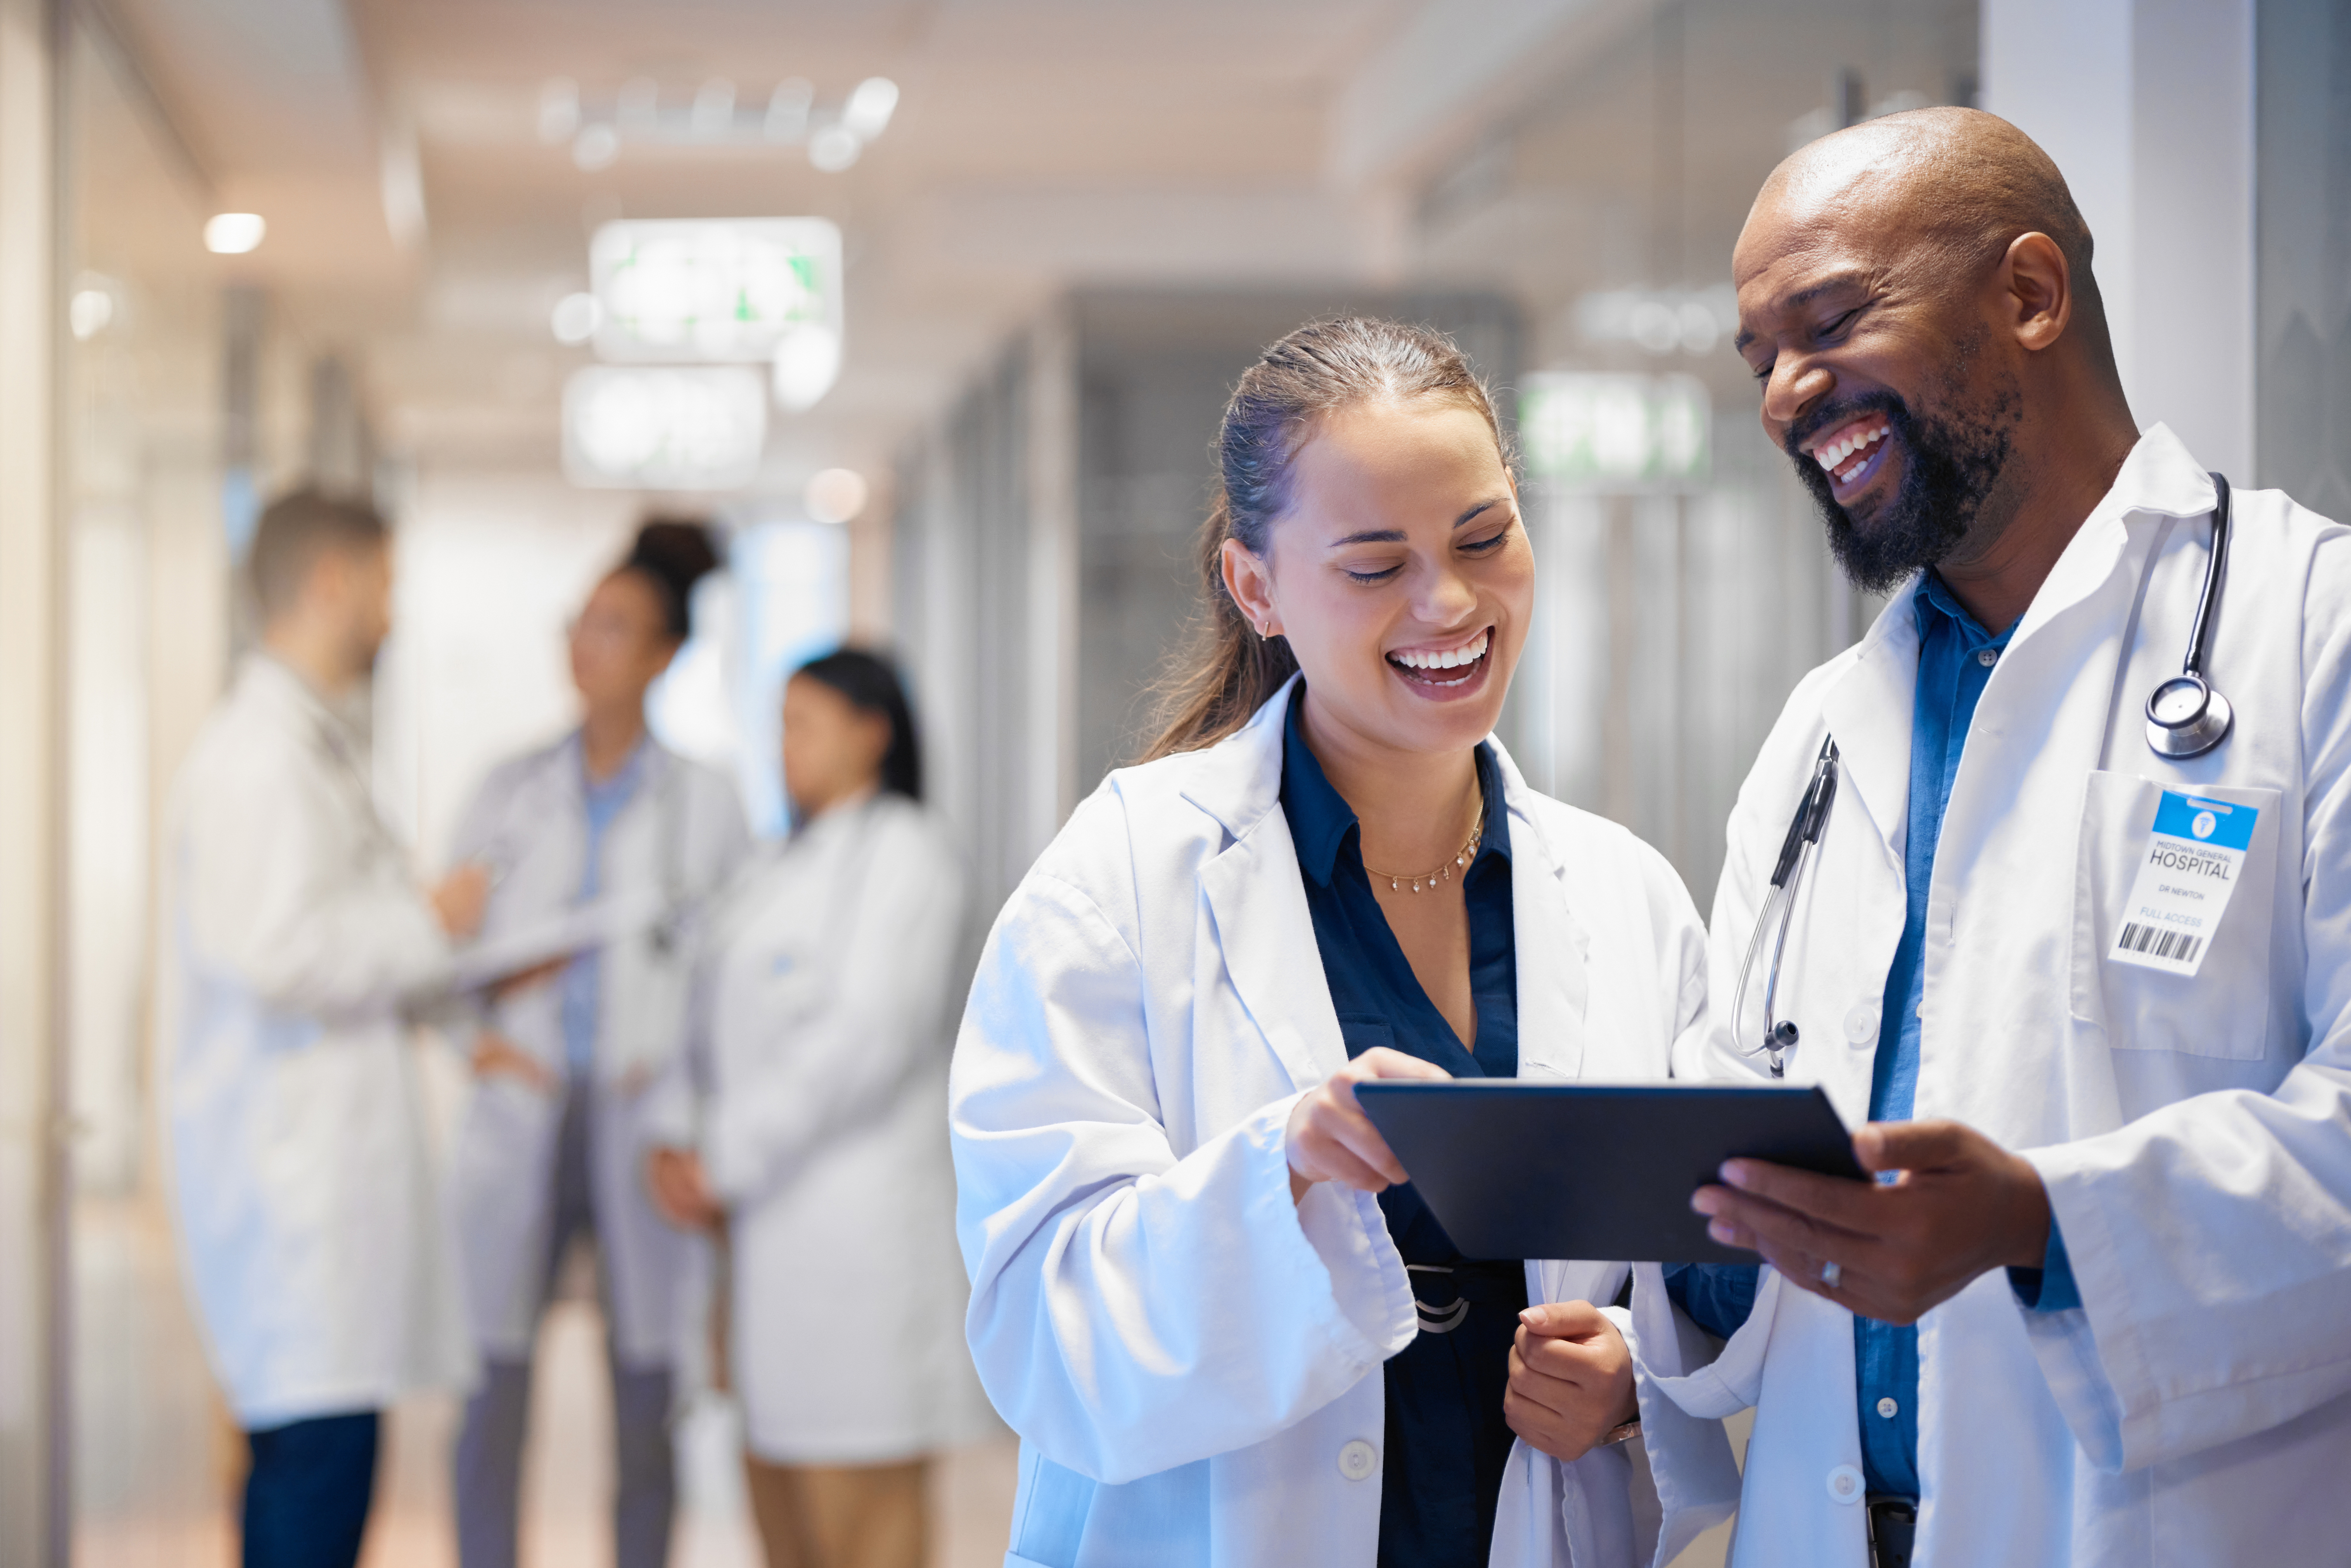 Doctors teamwork on tablet for hospital research management, employees workflow or software clinic solution. Healthcare people on digital tech for medical team analysis, results or problem solving